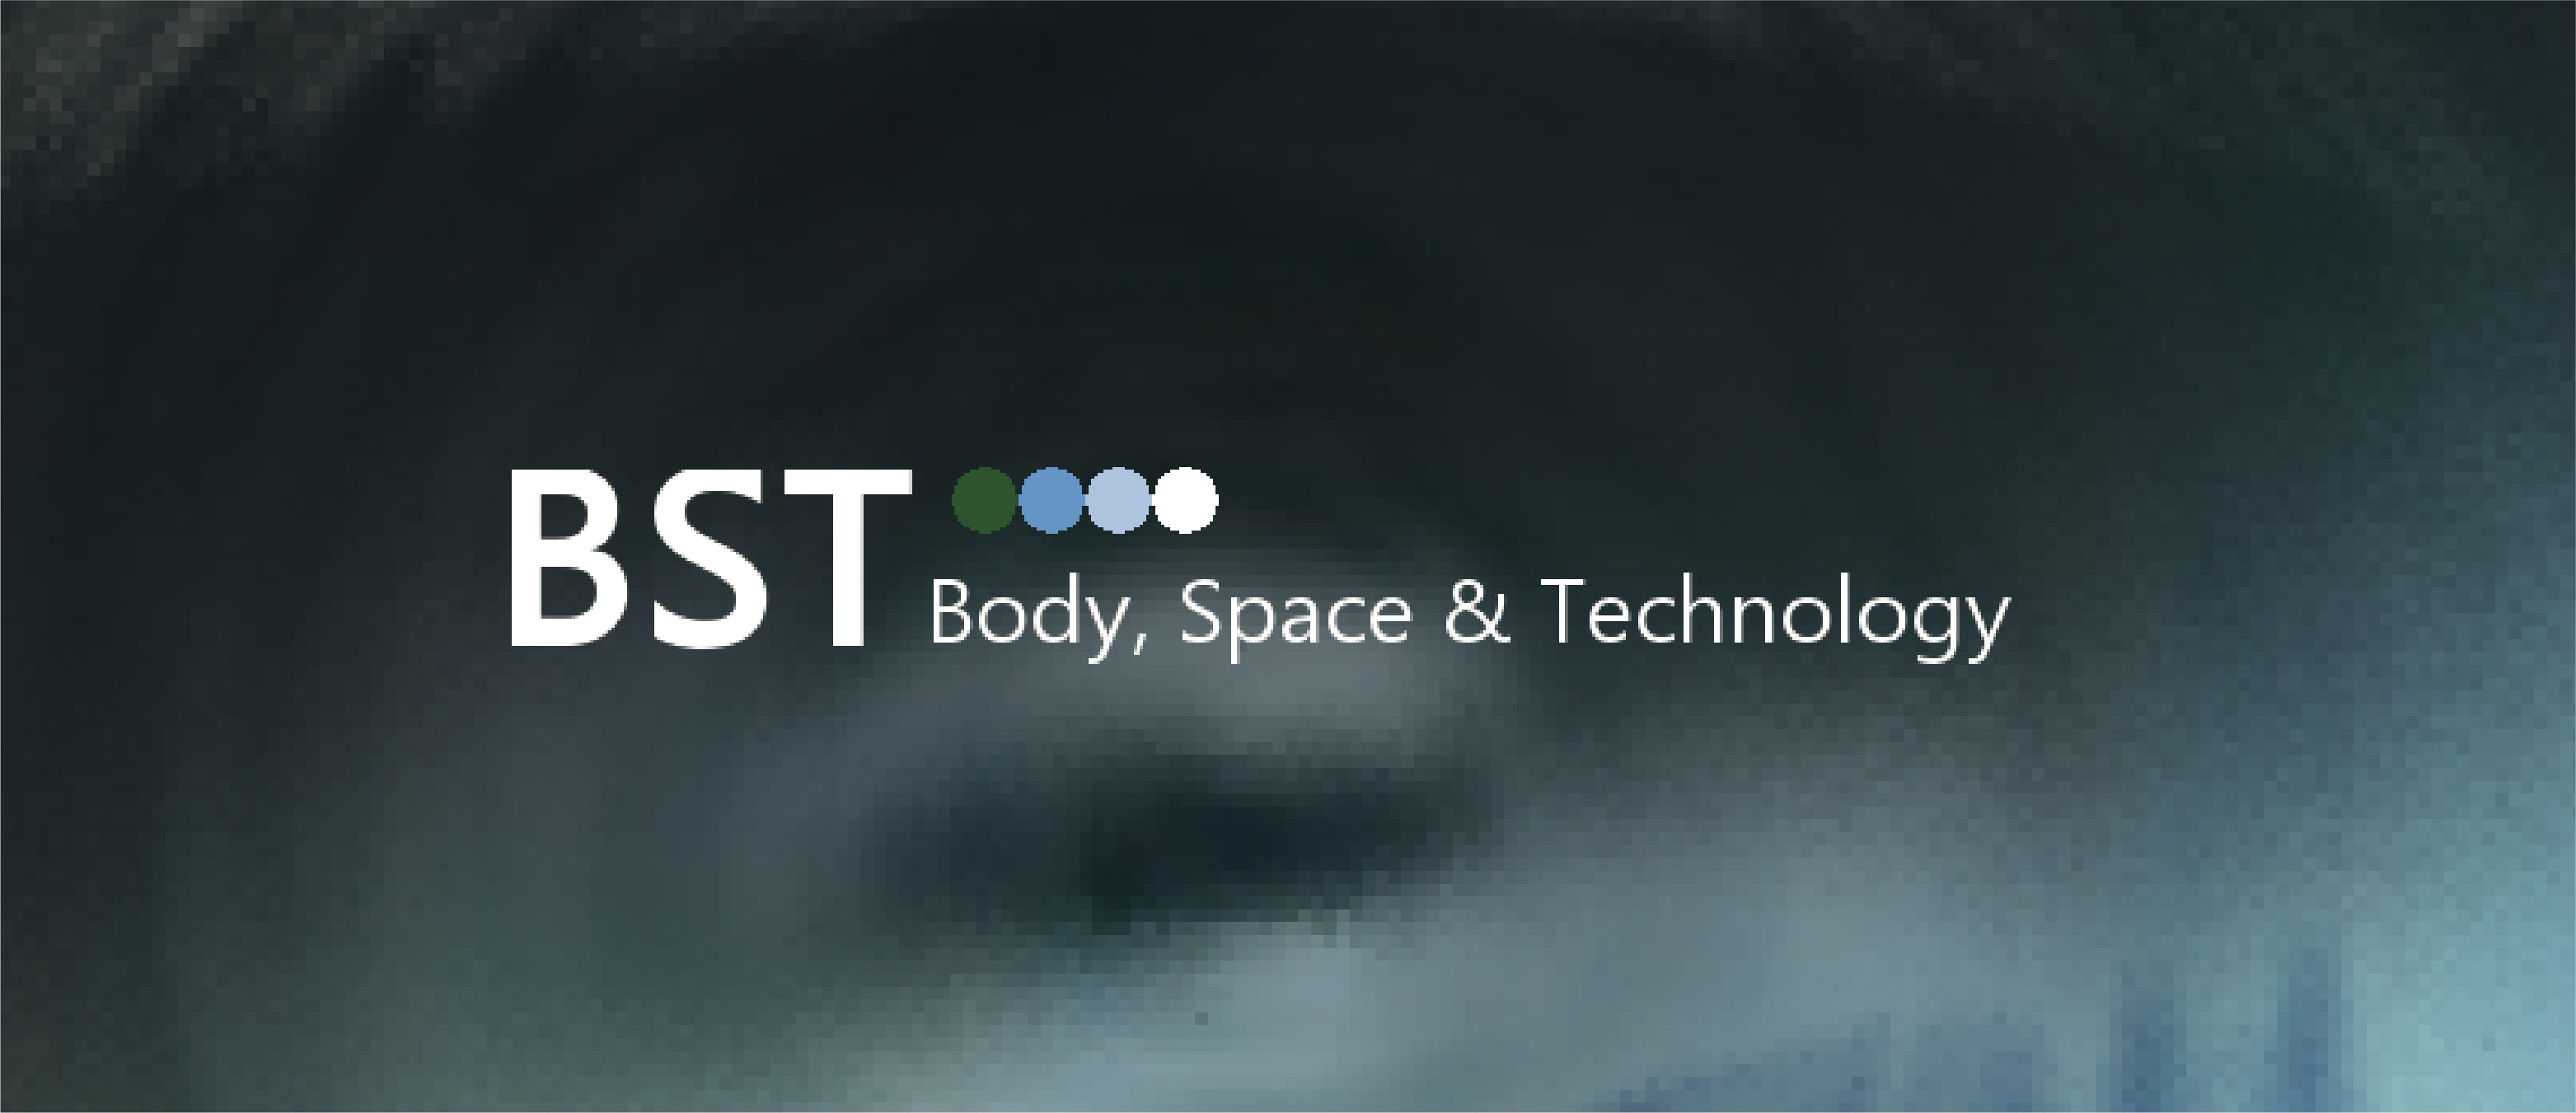 Intereaction, Reaction and Performance: The human body tracking project